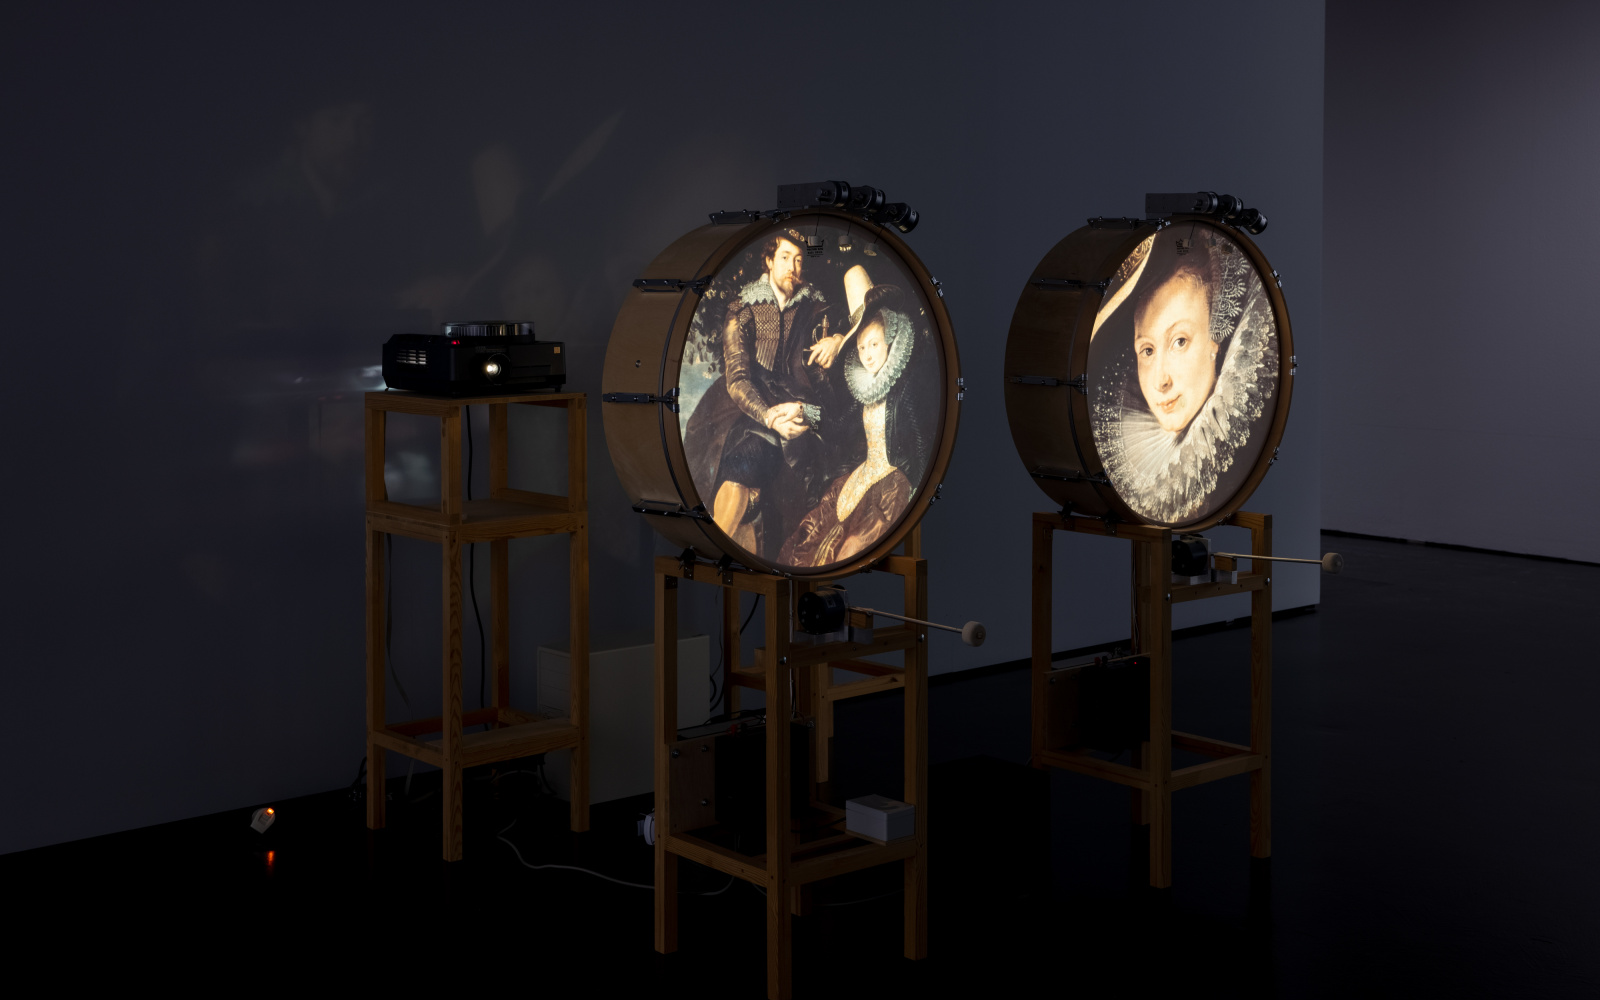 You can see two standing drums, each of which shows a picture on the round surface. On the left an ancient married couple and on the right the portrait of a woman. 